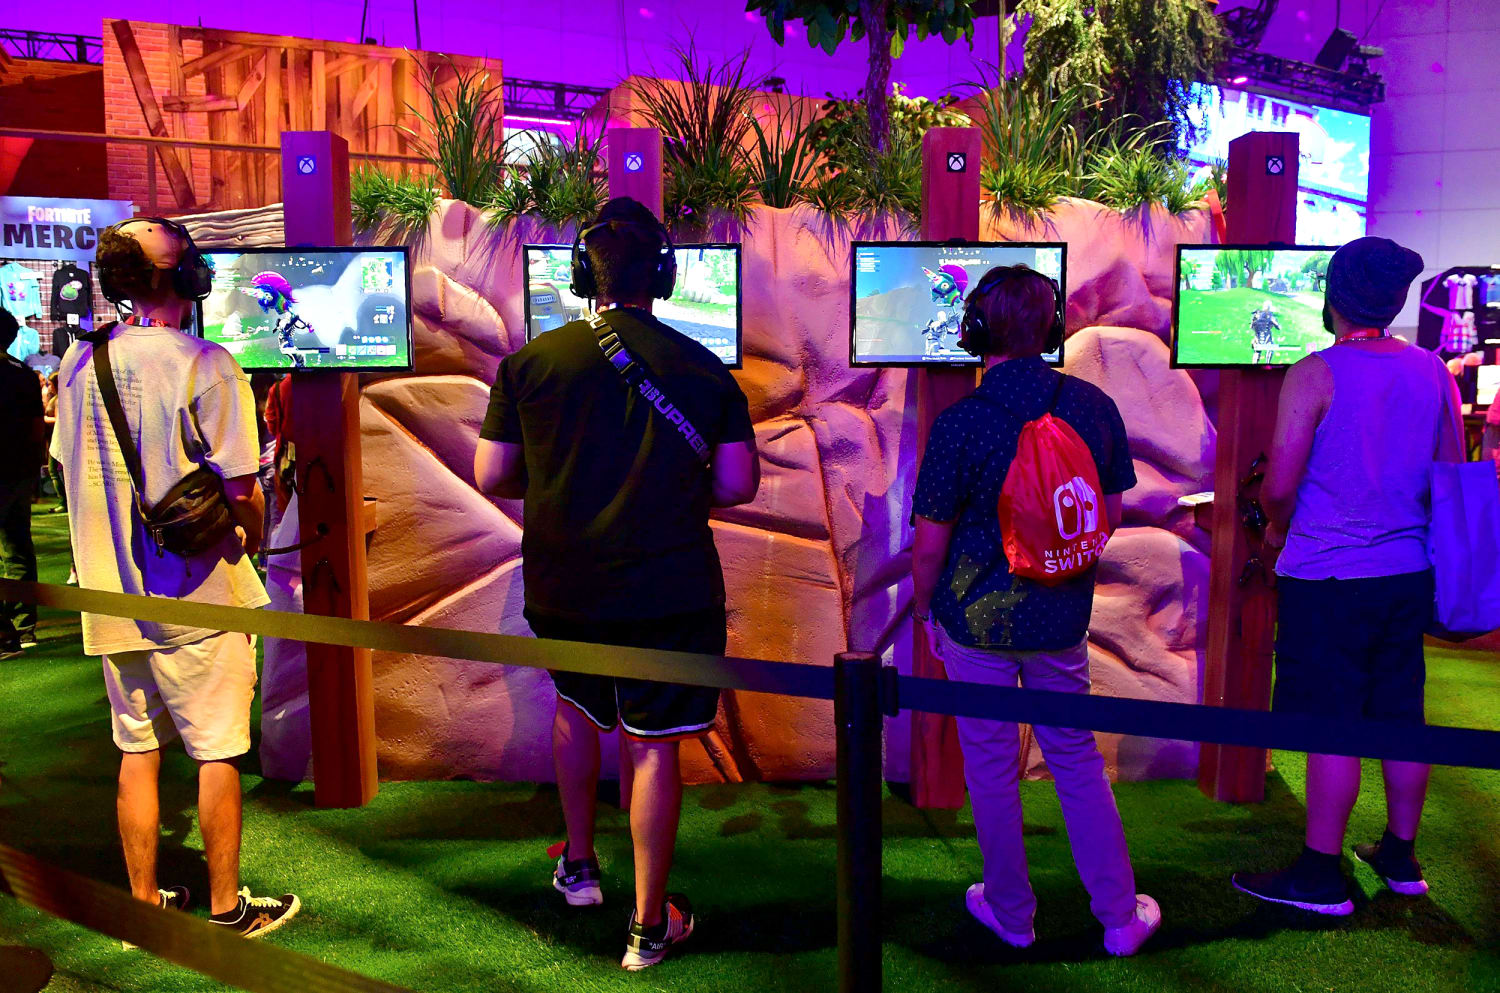 What is 'Fortnite'?: A look at the video game that has become a